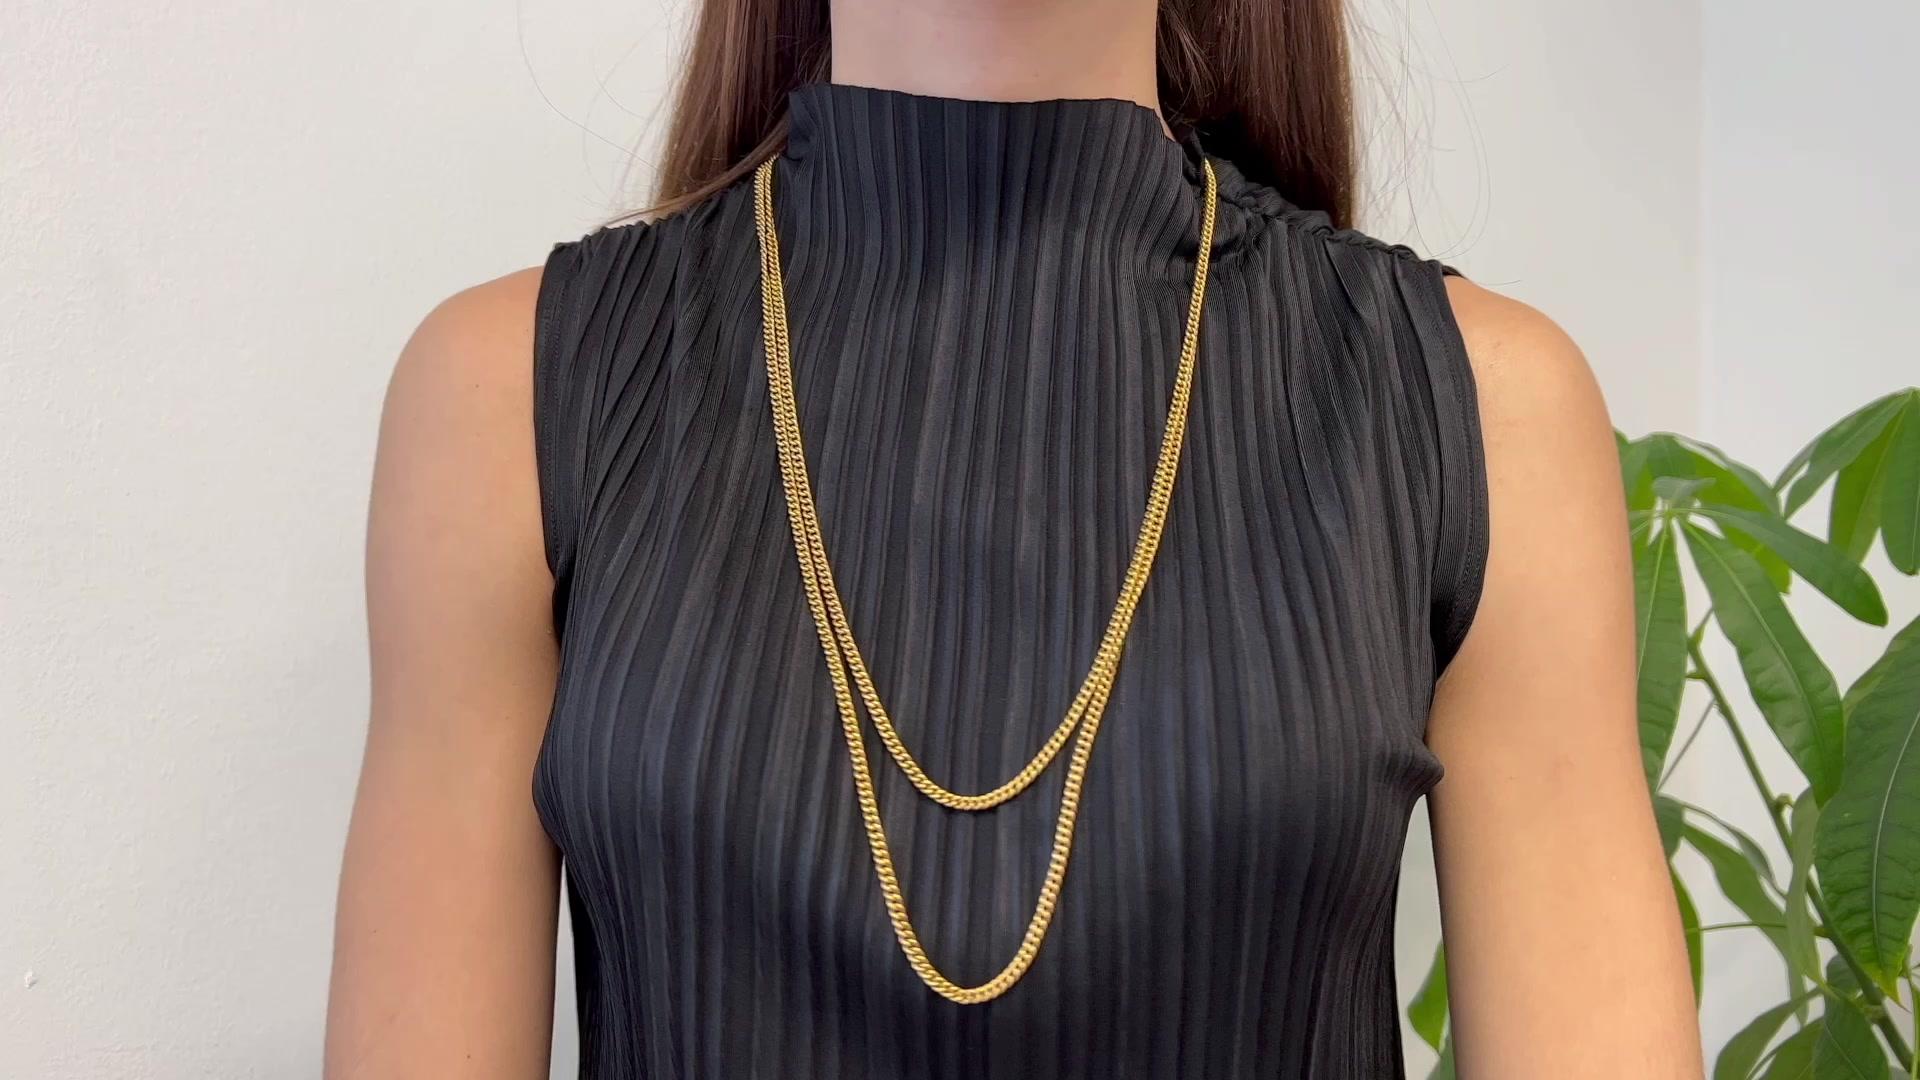 One Antique French 18 Karat Yellow Gold Long Guard Chain. Crafted in 18 karat yellow gold with French hallmarks. Circa 1880. The necklace is 60 inches in length.

About this Item: Embrace your true sophistication with the delicacy of this antique